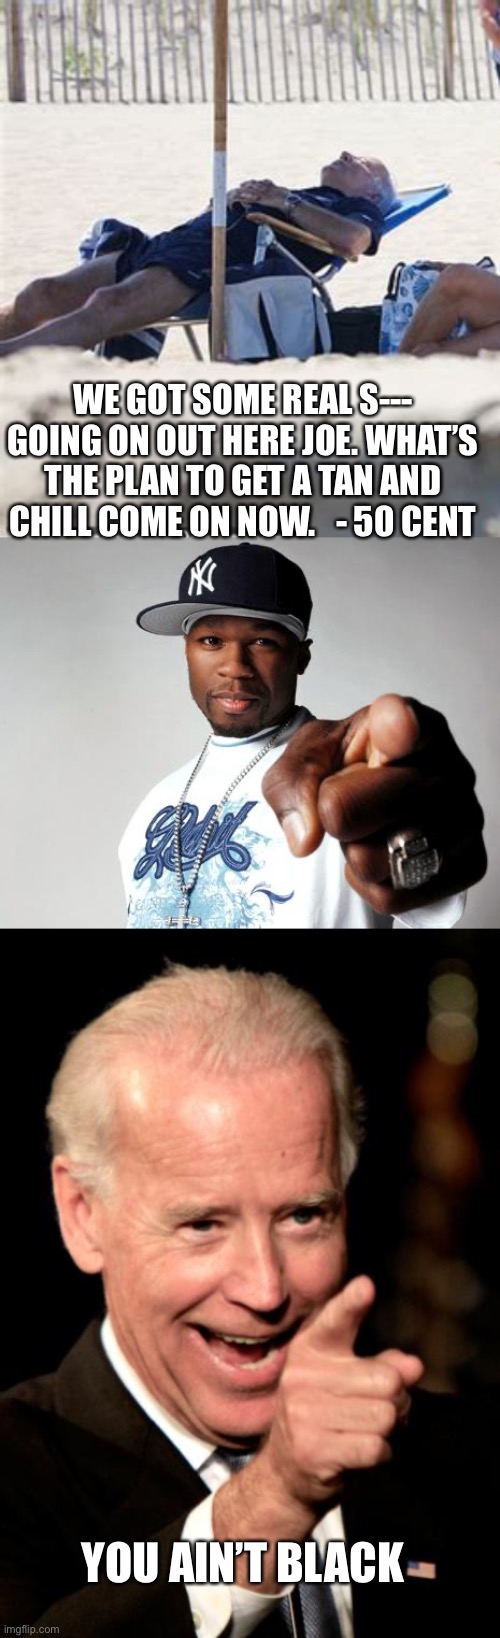 If you vote for a guy who doesn’t work to get elected, what makes you think he will work once elected? | WE GOT SOME REAL S--- GOING ON OUT HERE JOE. WHAT’S THE PLAN TO GET A TAN AND CHILL COME ON NOW.   - 50 CENT; YOU AIN’T BLACK | image tagged in 50 cent,smilin biden,beach,crisis | made w/ Imgflip meme maker